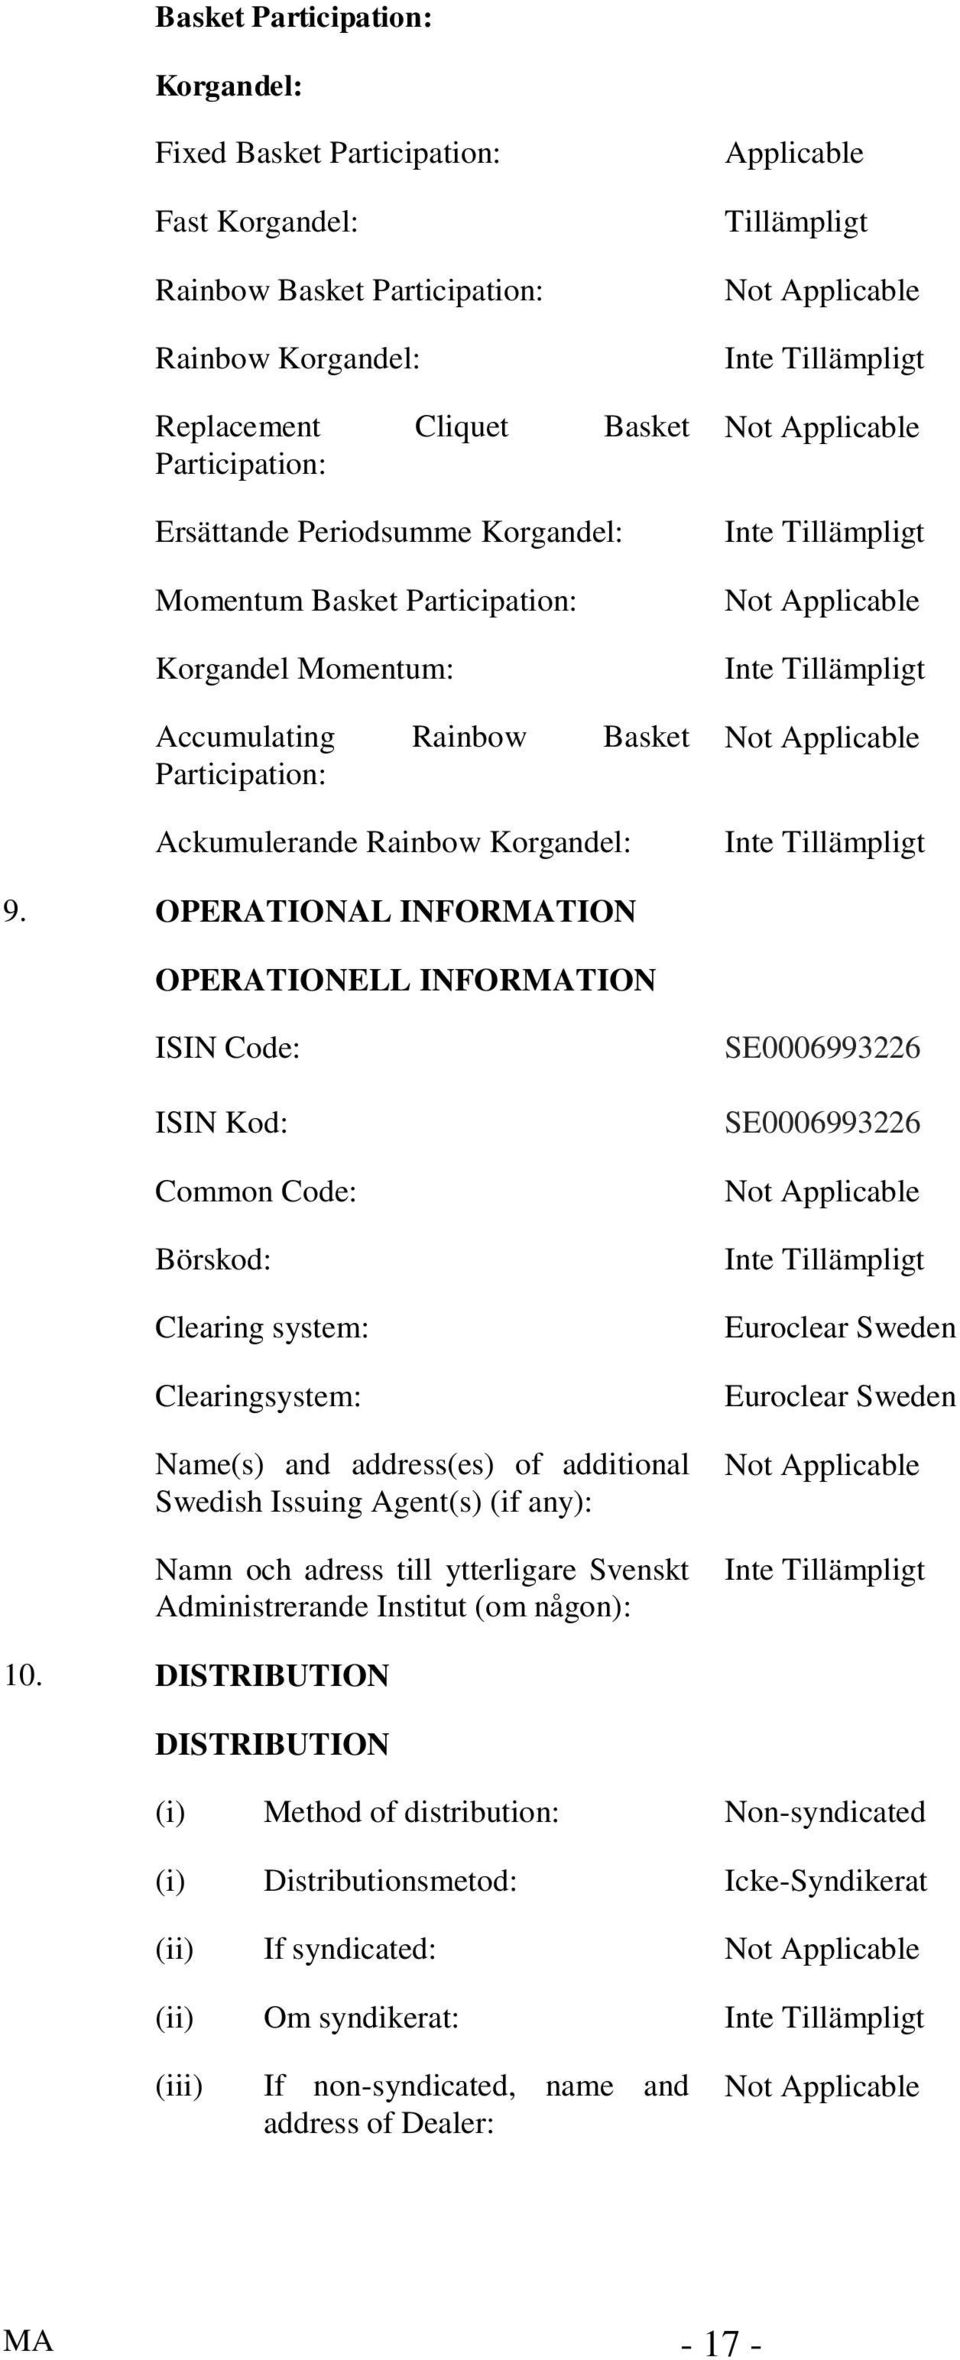 OPERATIONAL INFORMATION OPERATIONELL INFORMATION ISIN Code: ISIN Kod: Common Code: Börskod: Clearing system: Clearingsystem: Name(s) and address(es) of additional Swedish Issuing Agent(s) (if any):